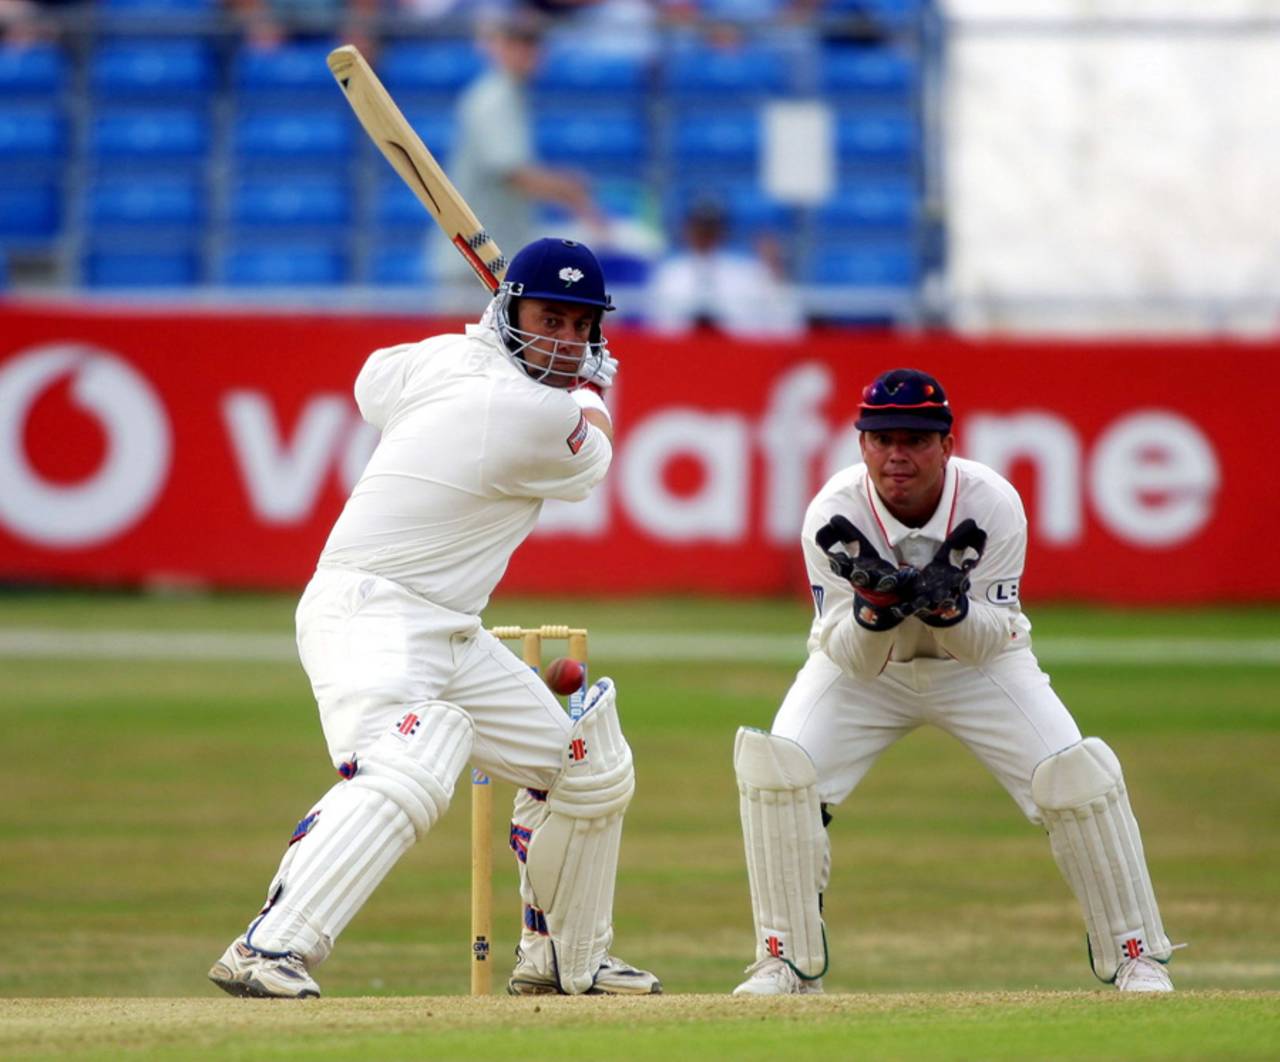 Darren Lehmann on his way to a double-century, Yorkshire v Lancashire, County Championship Division One, 3rd day, Headingley, July 28, 2001